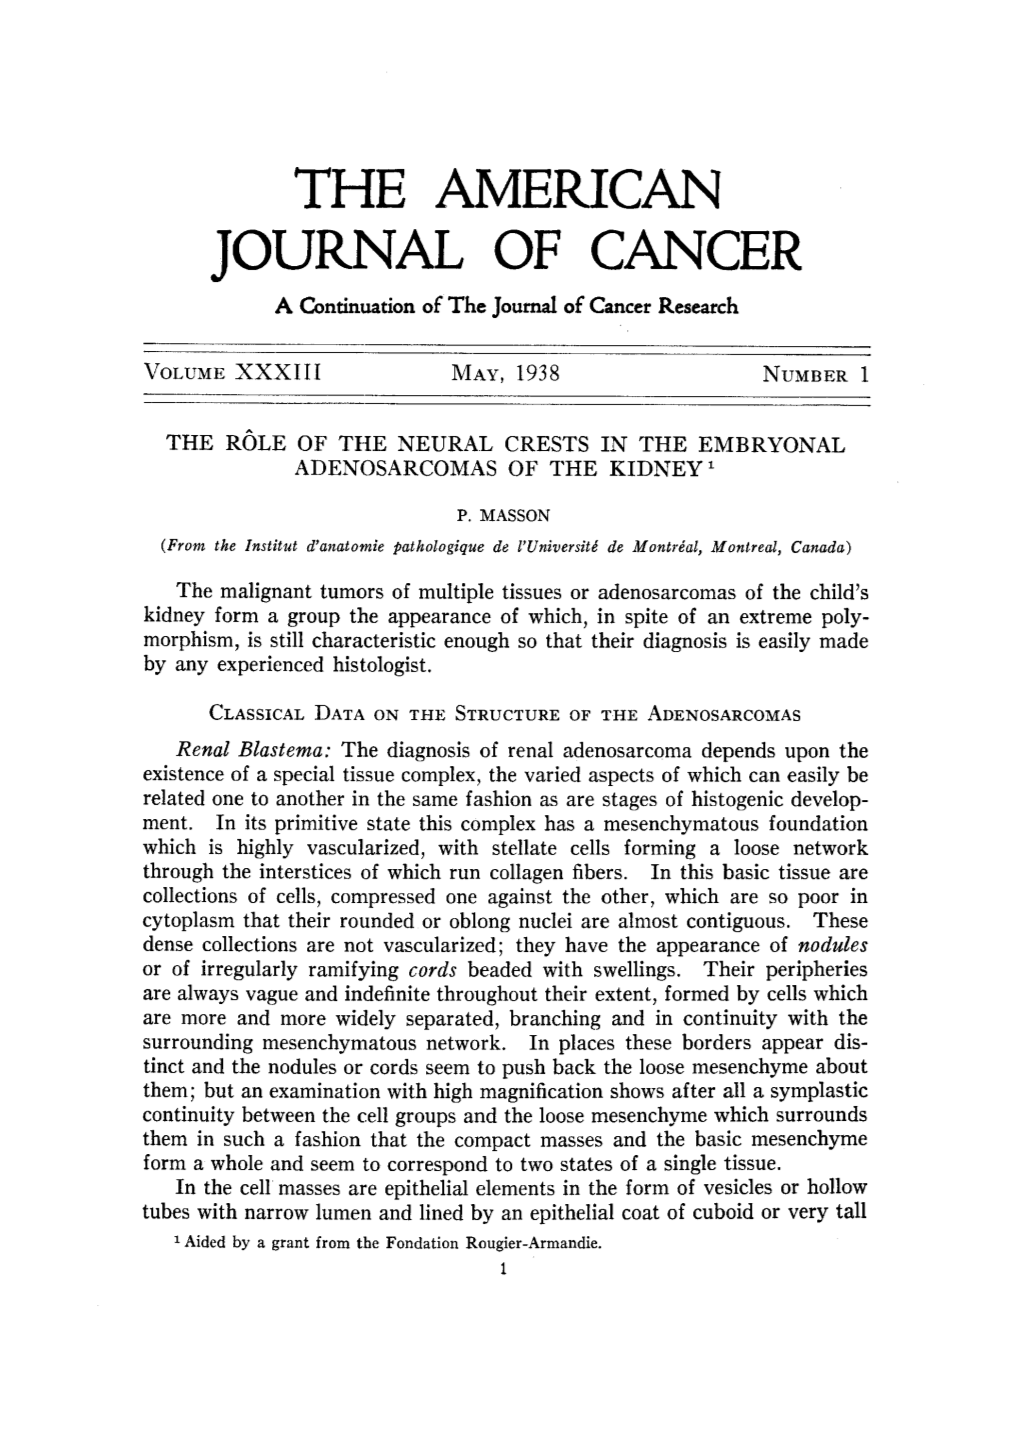 THE AMERICAN JOURNAL of CANCER a Continuation of the Journal of Cancer Research ______VOLUMEXXXIII MAY, 1938 NUMBER1